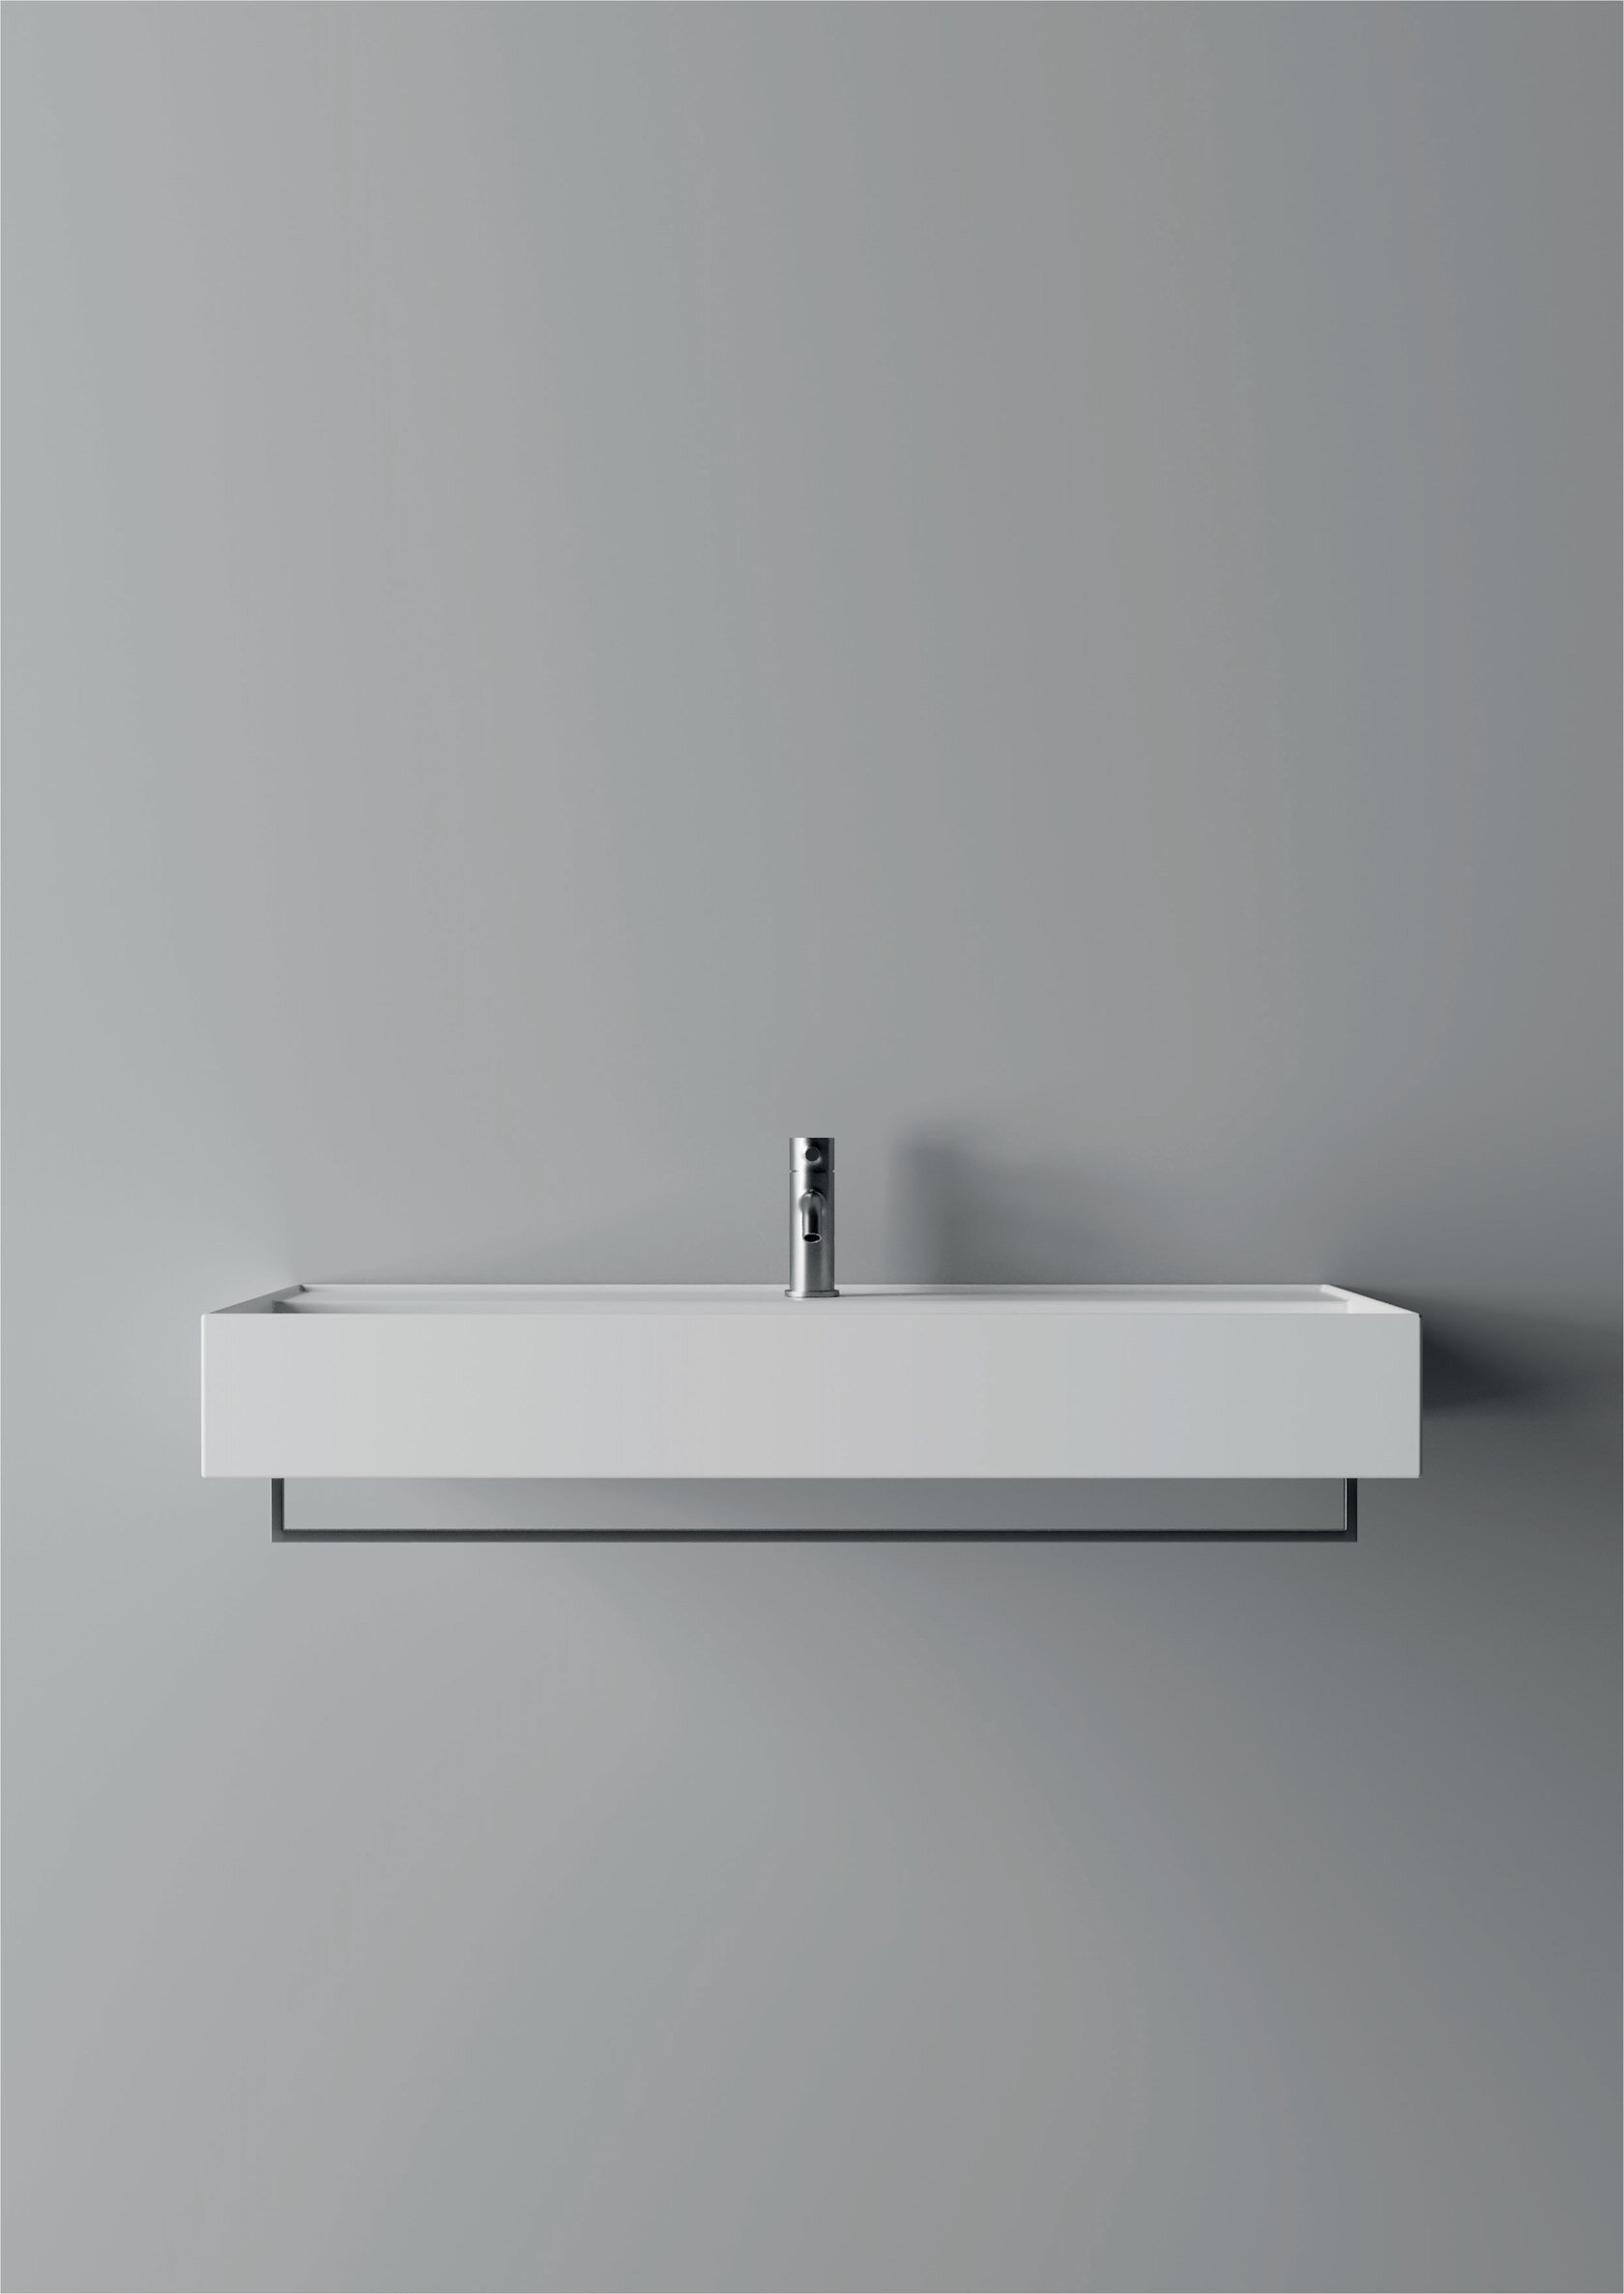 2b_HIDE-Wall-mounted-washbasin-Alice-Ceramica-364911-relaa4209a7.png